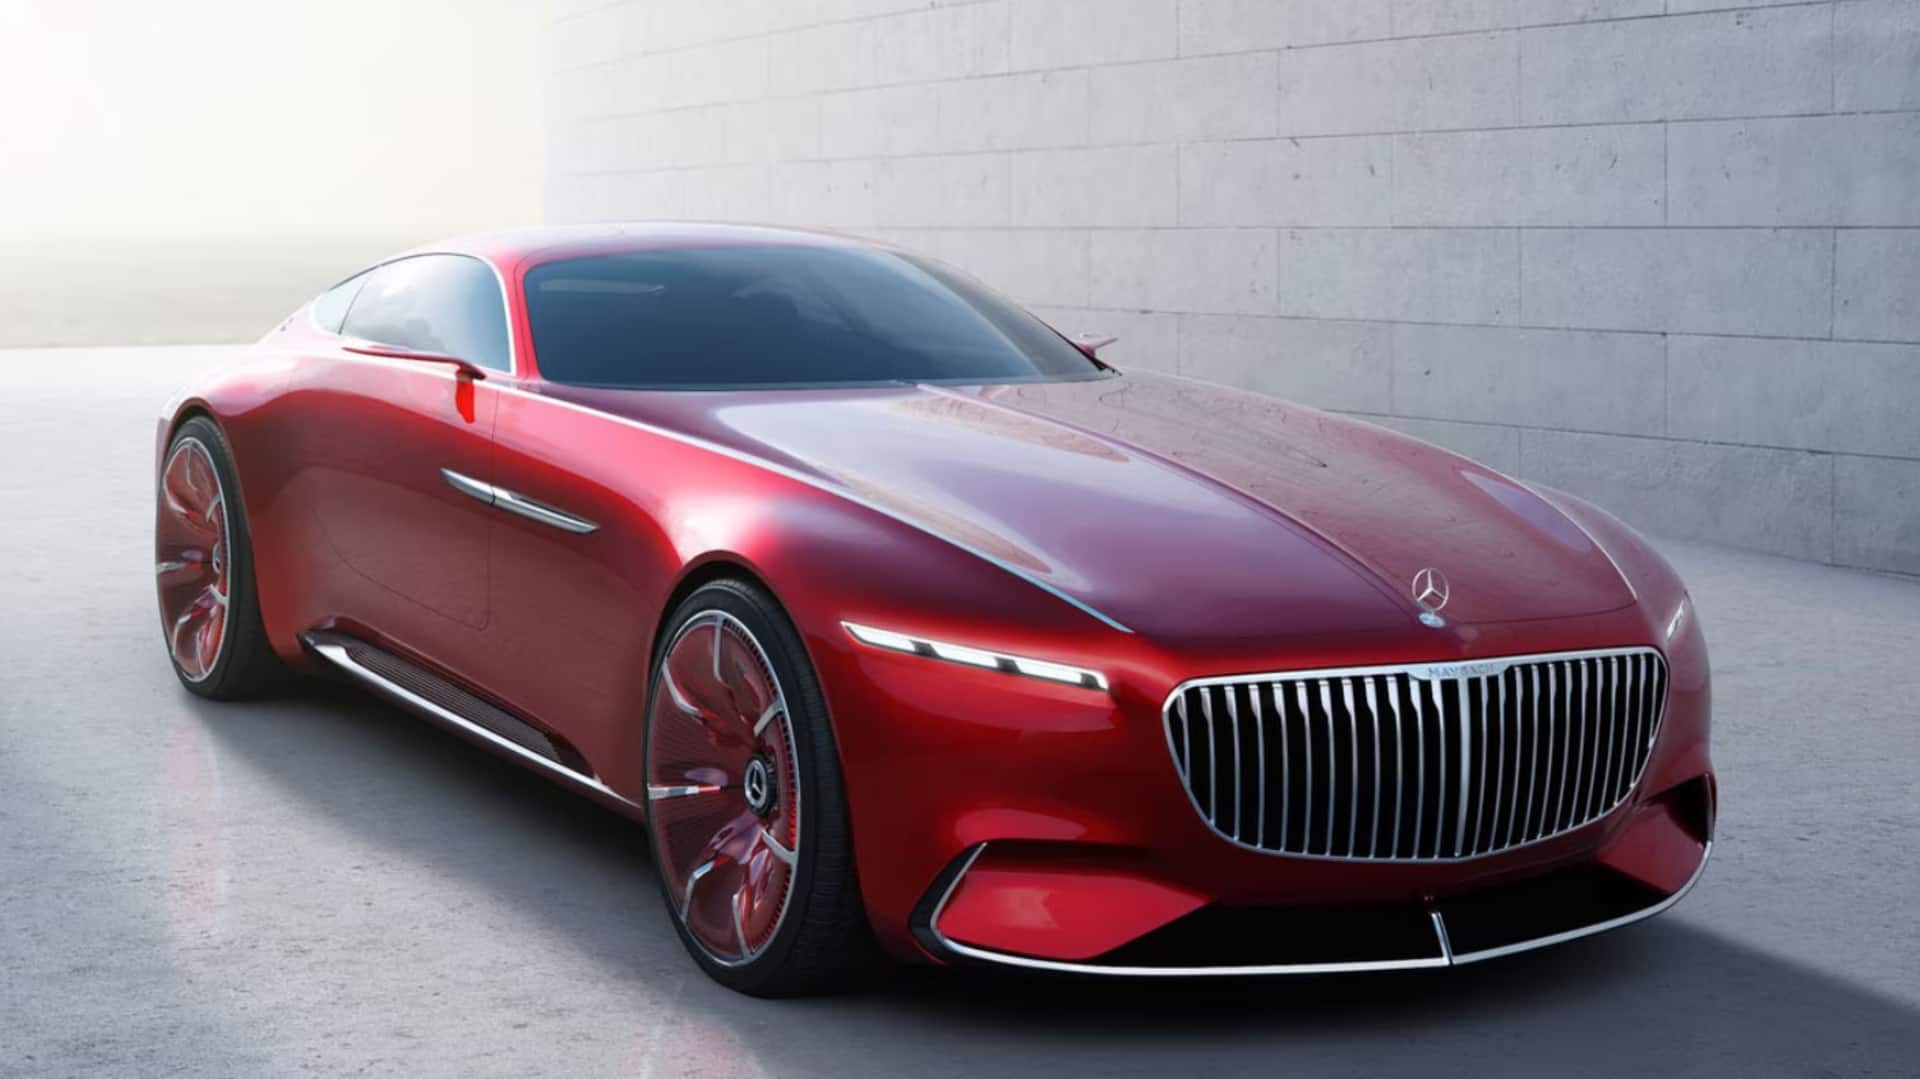 Vision Mercedes-Maybach 6 concept showcased in India: Check features, design